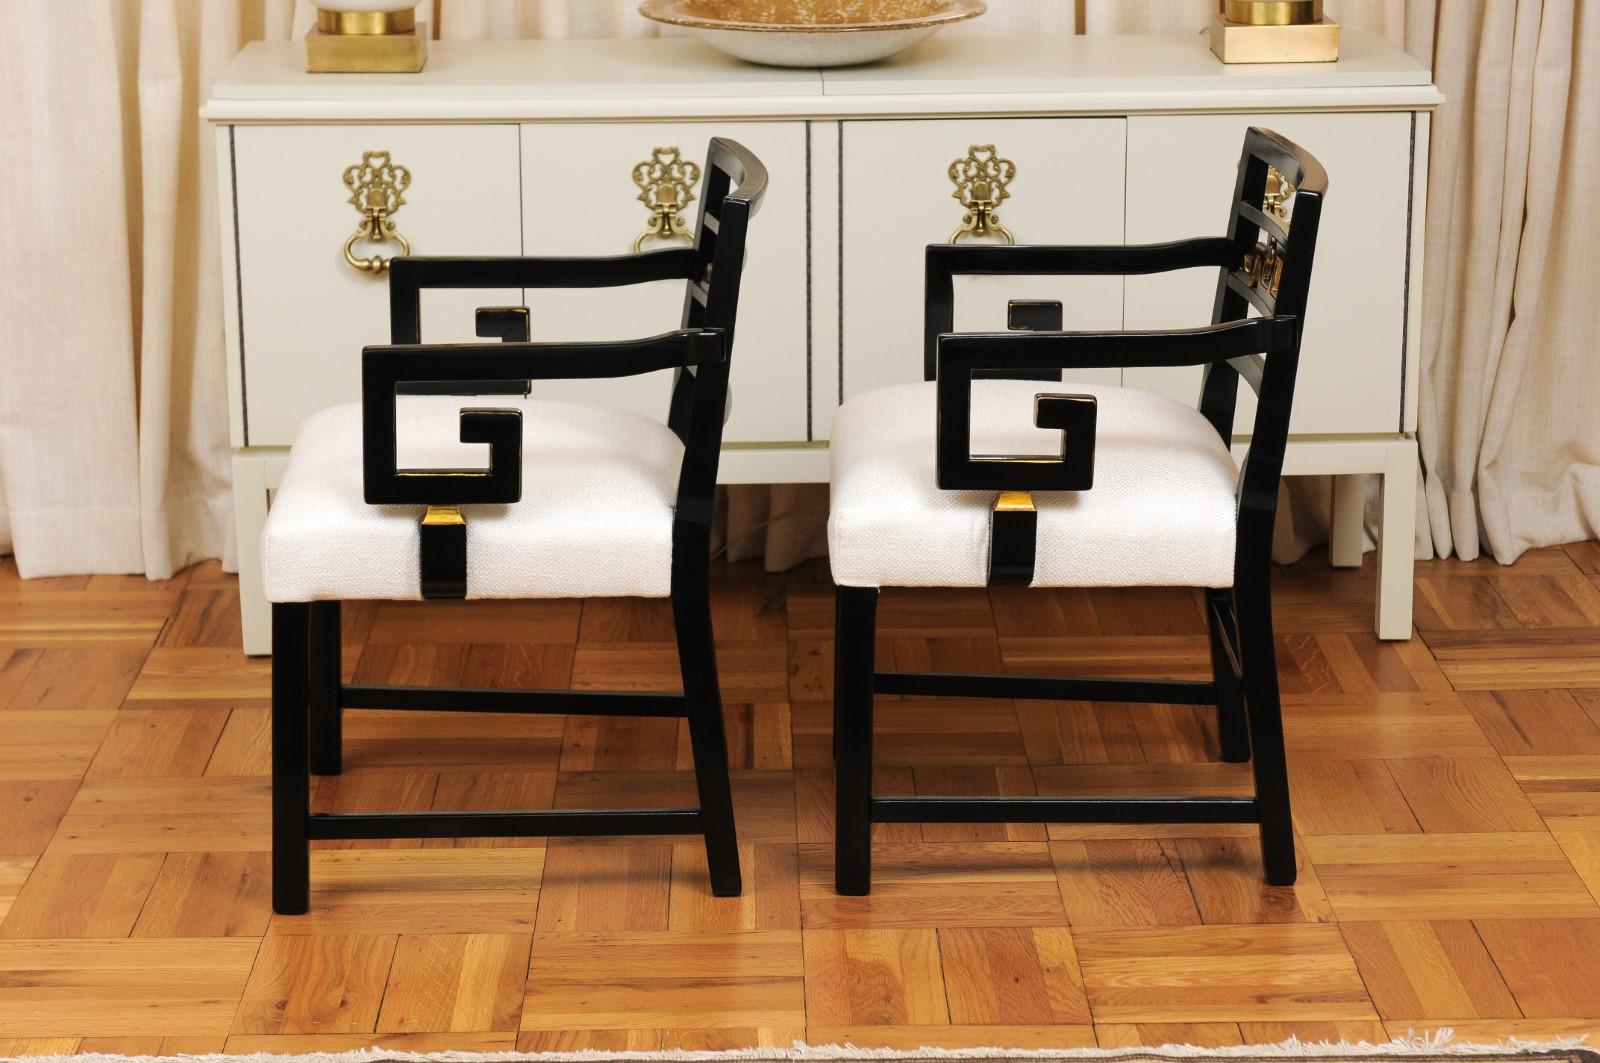 Exquisite Pair of Modern Chinoiserie Greek Key Armchairs by Baker, circa 1960 For Sale 6